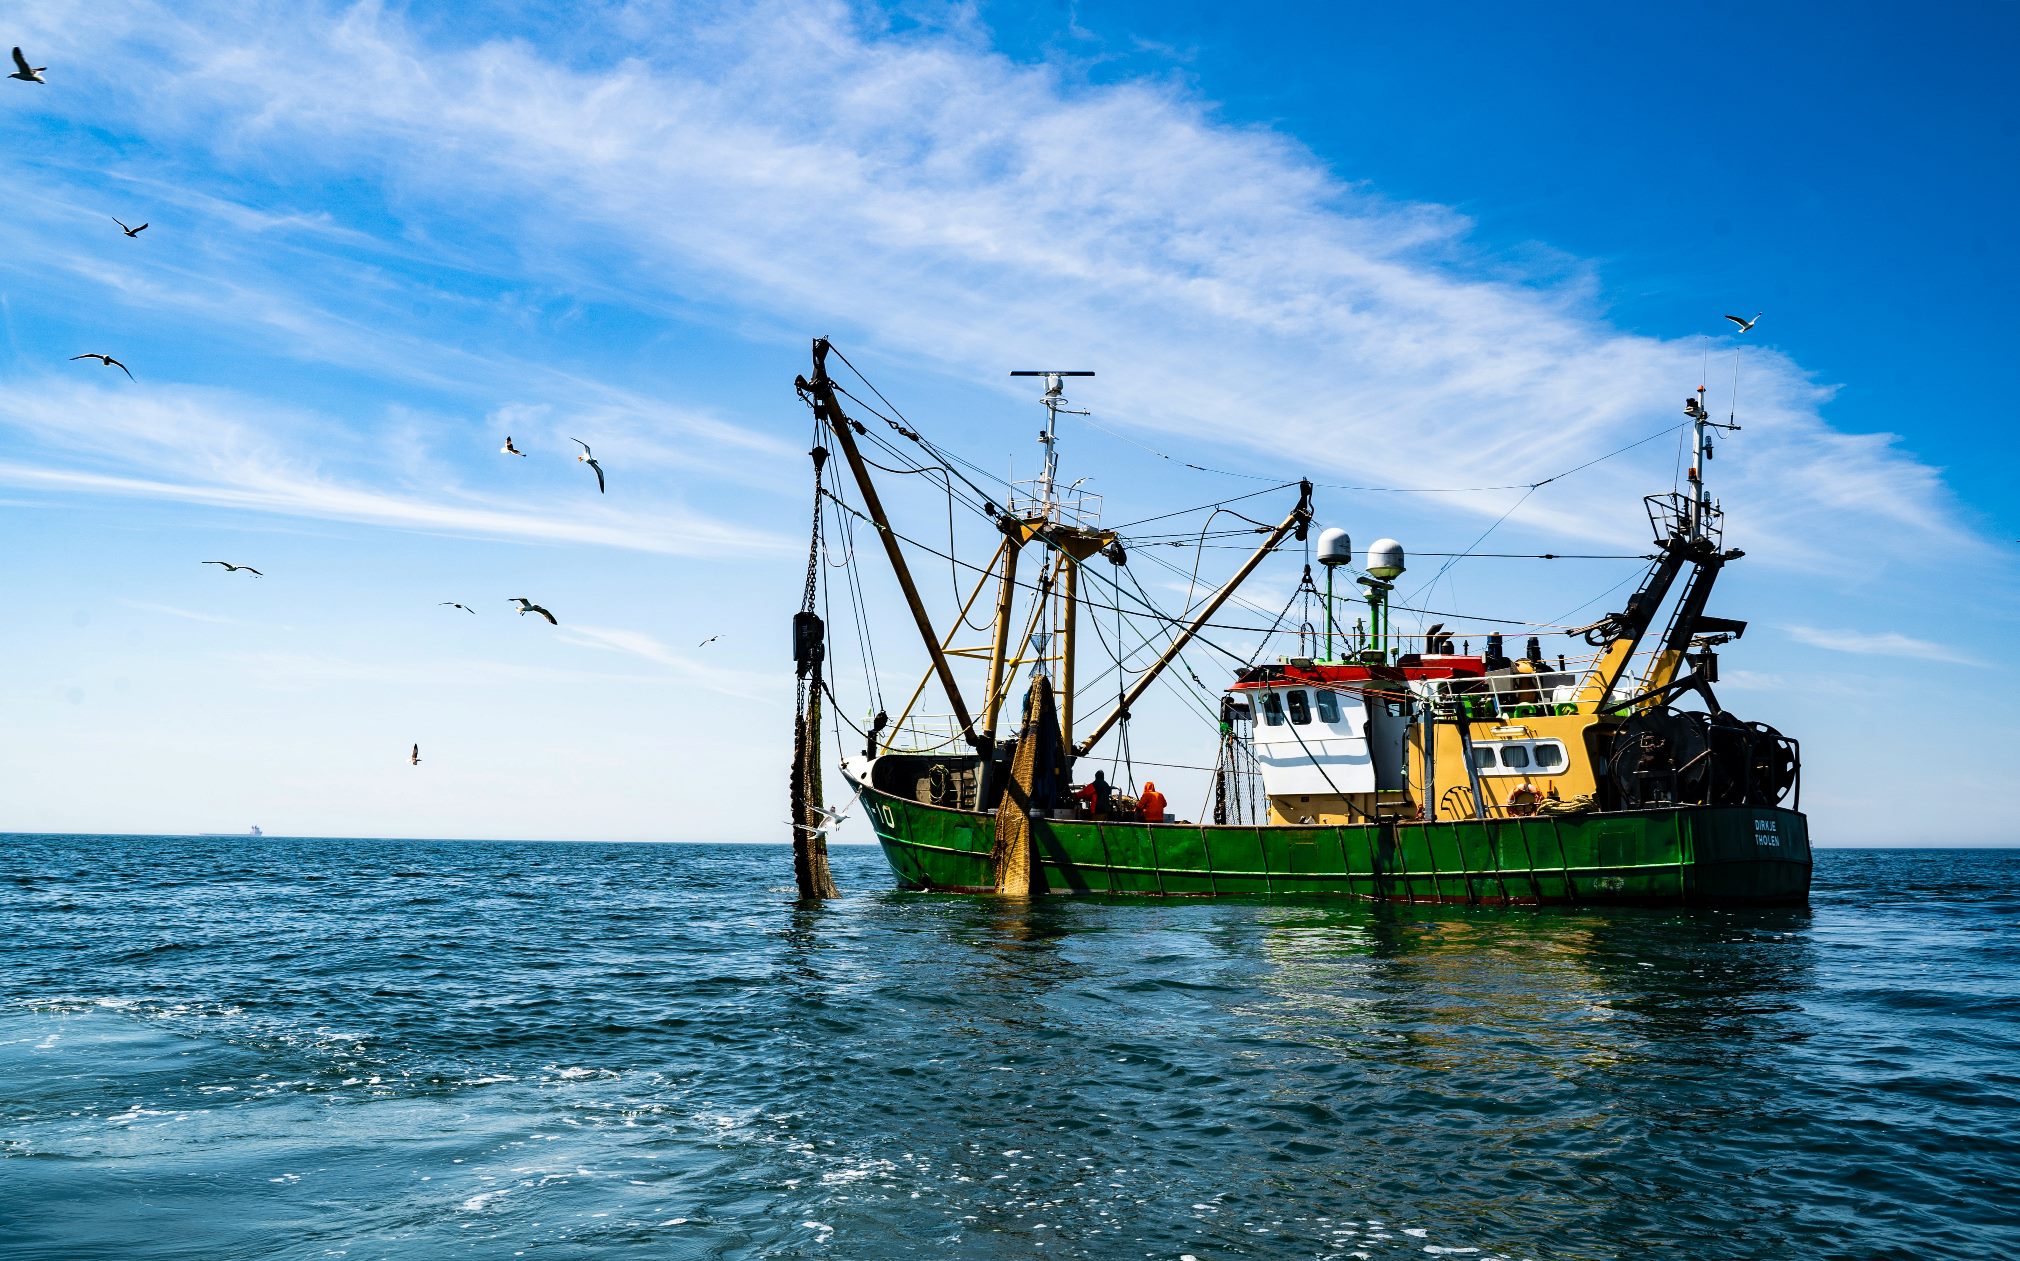 Fisheries and ecosystem services, new challenges for evaluating the impacts of climate change